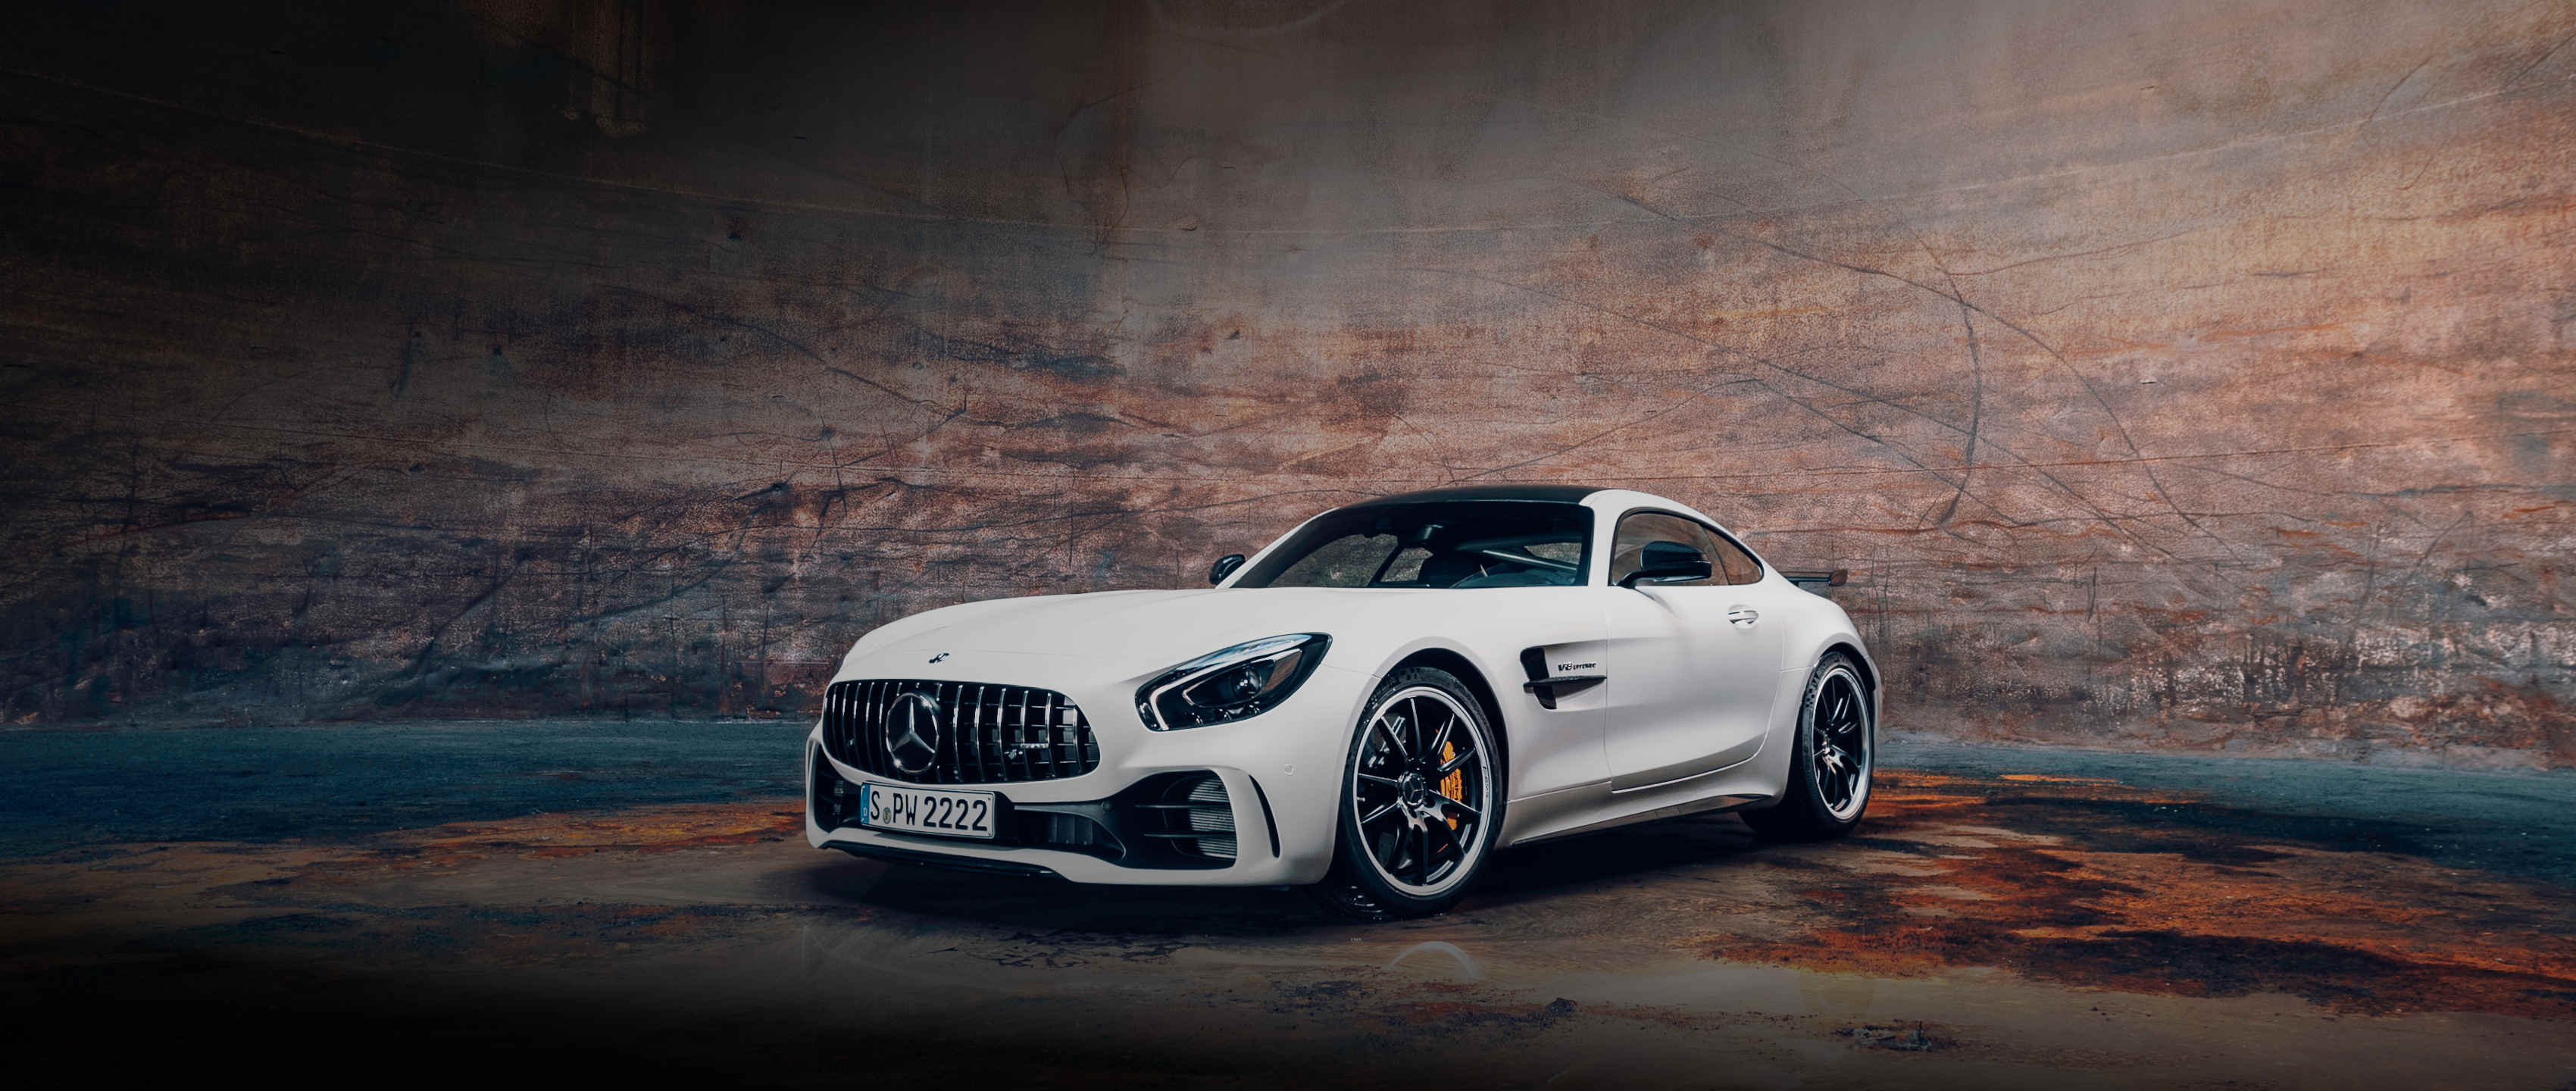 Amg Gt Wallpapers Top Free Amg Gt Backgrounds Wallpaperaccess